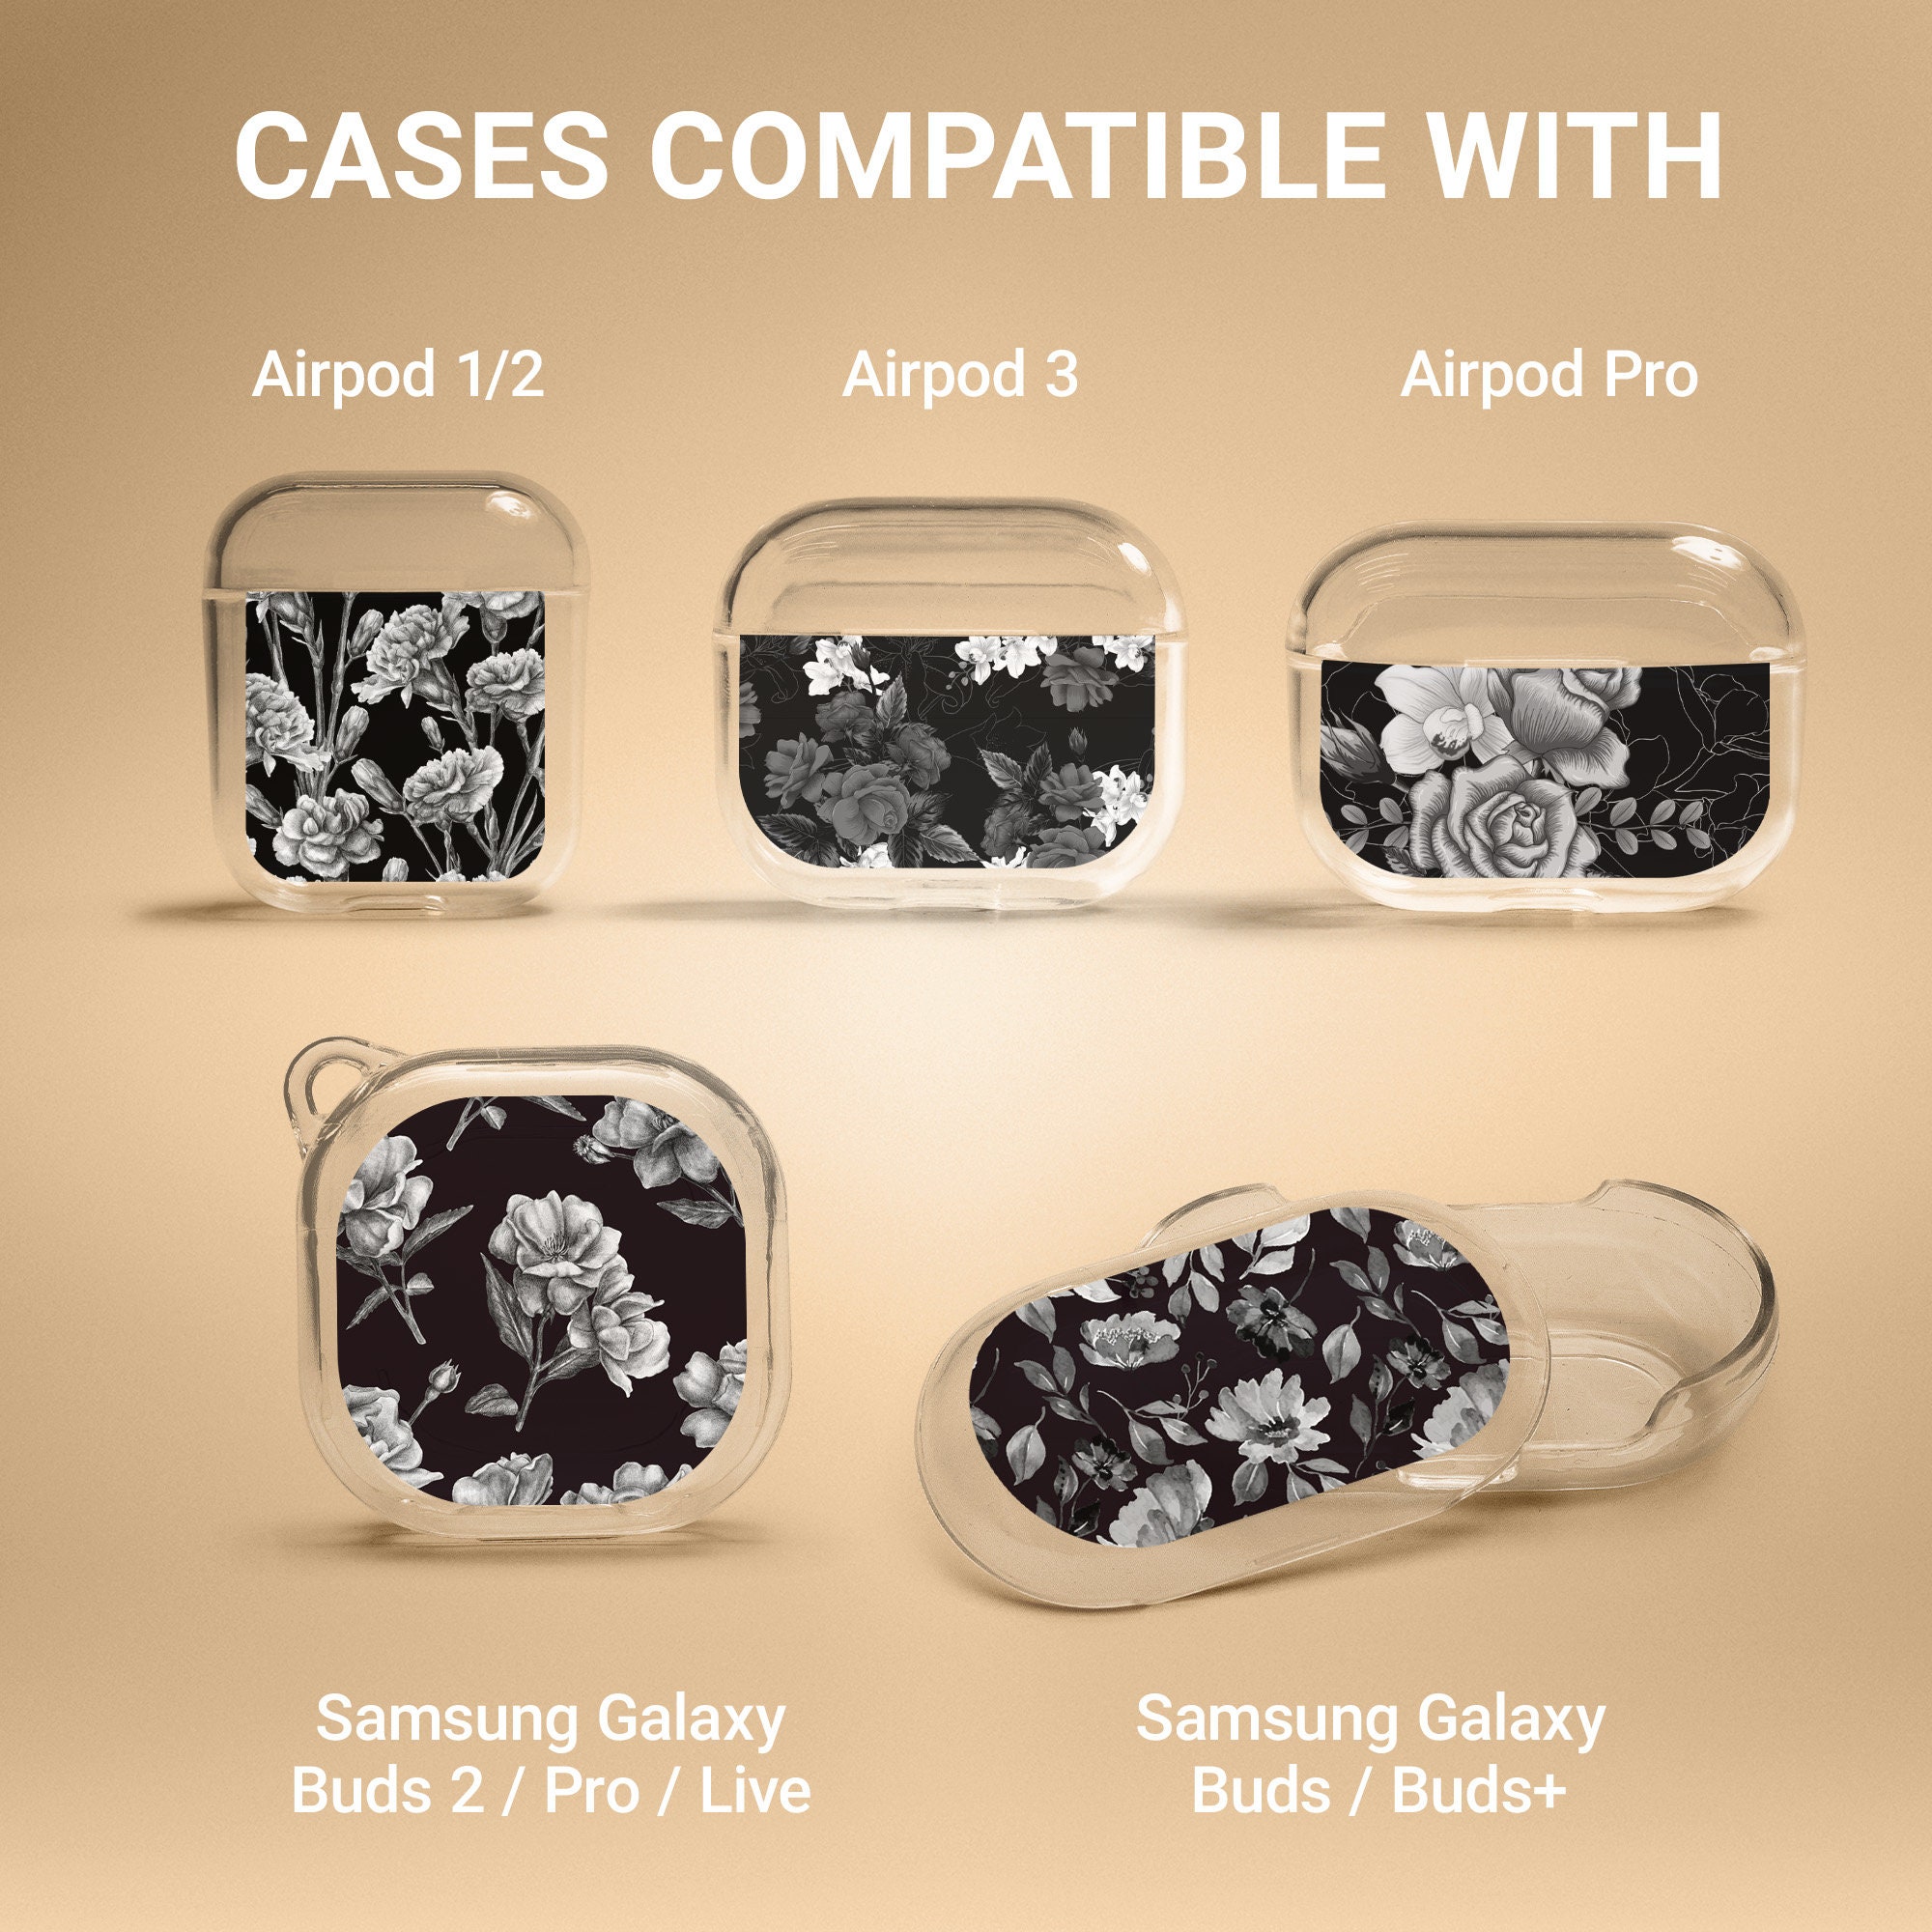 Louis Faith Case in Future Cover for Apple Airpods Pro, Airpods 3, Airpods  1, 2, Samsung Galaxy Buds 2, Buds+, Buds live